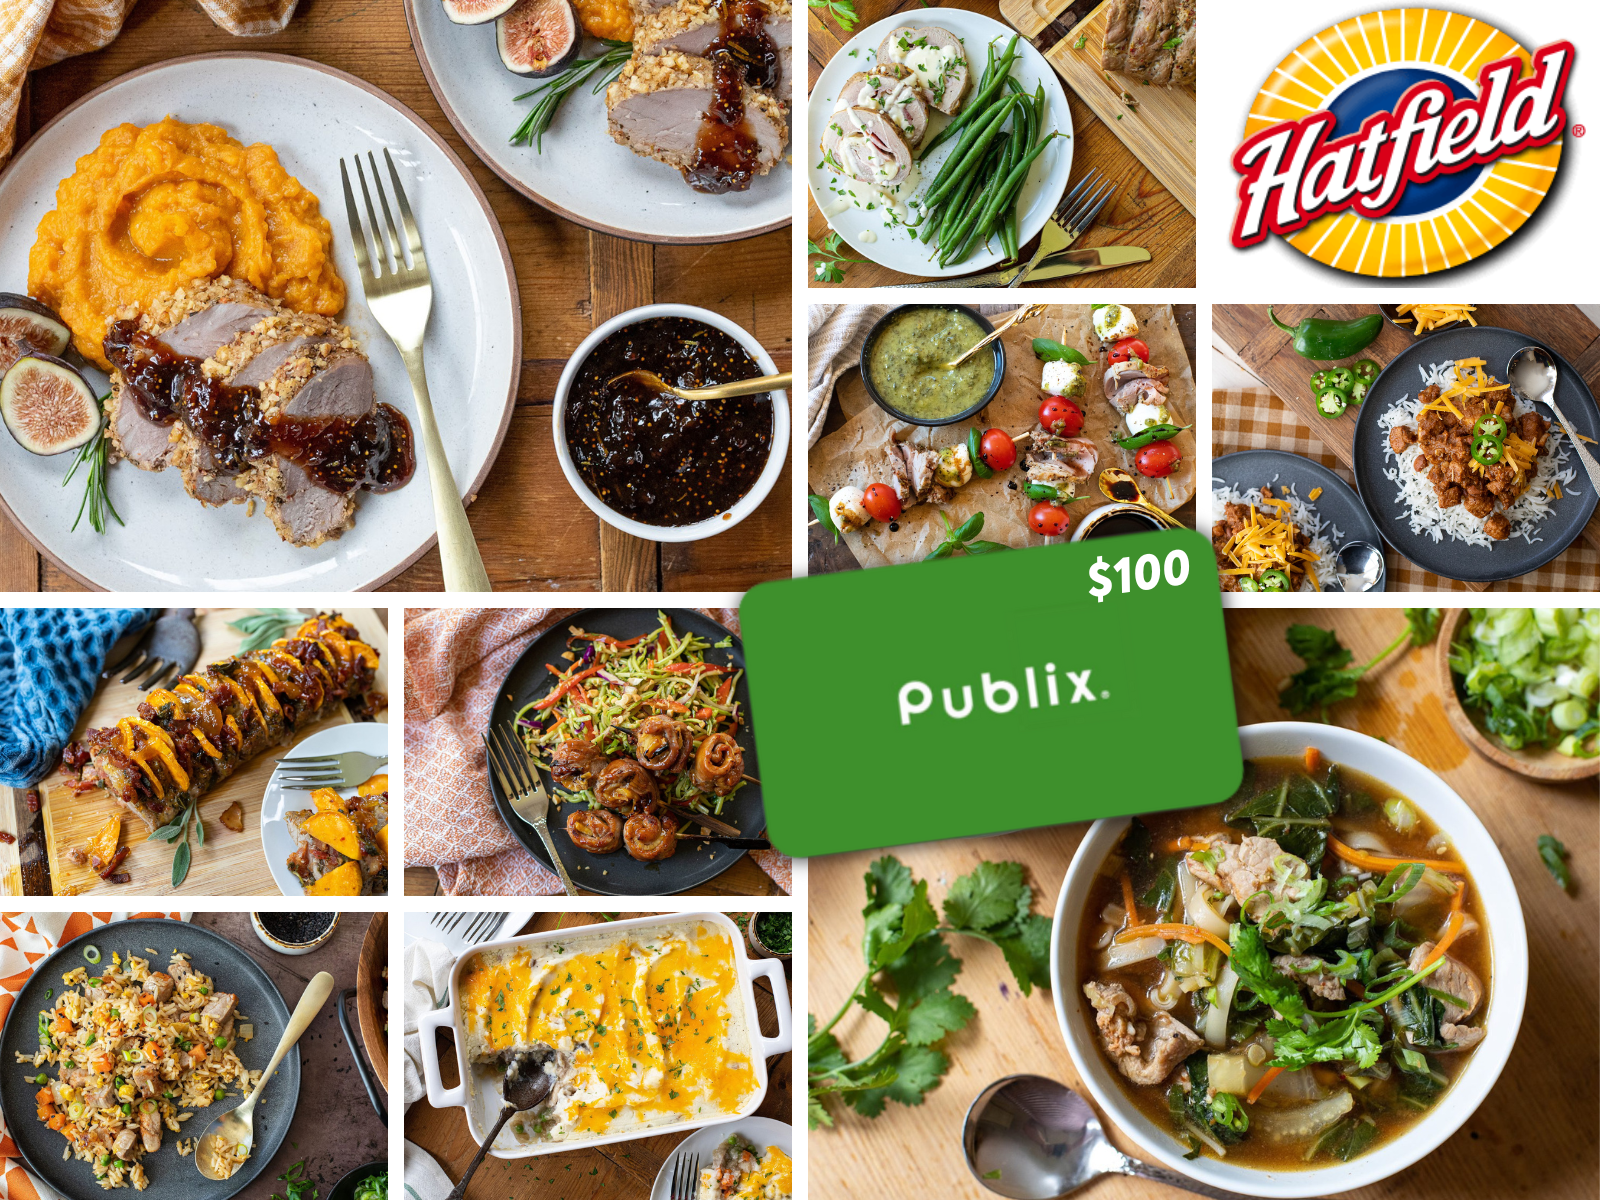 Delicious Hatfield Pork Tenderloin And Pork Loin Filet Products Are BOGO + Enter To Win A $100 Publix Gift Card